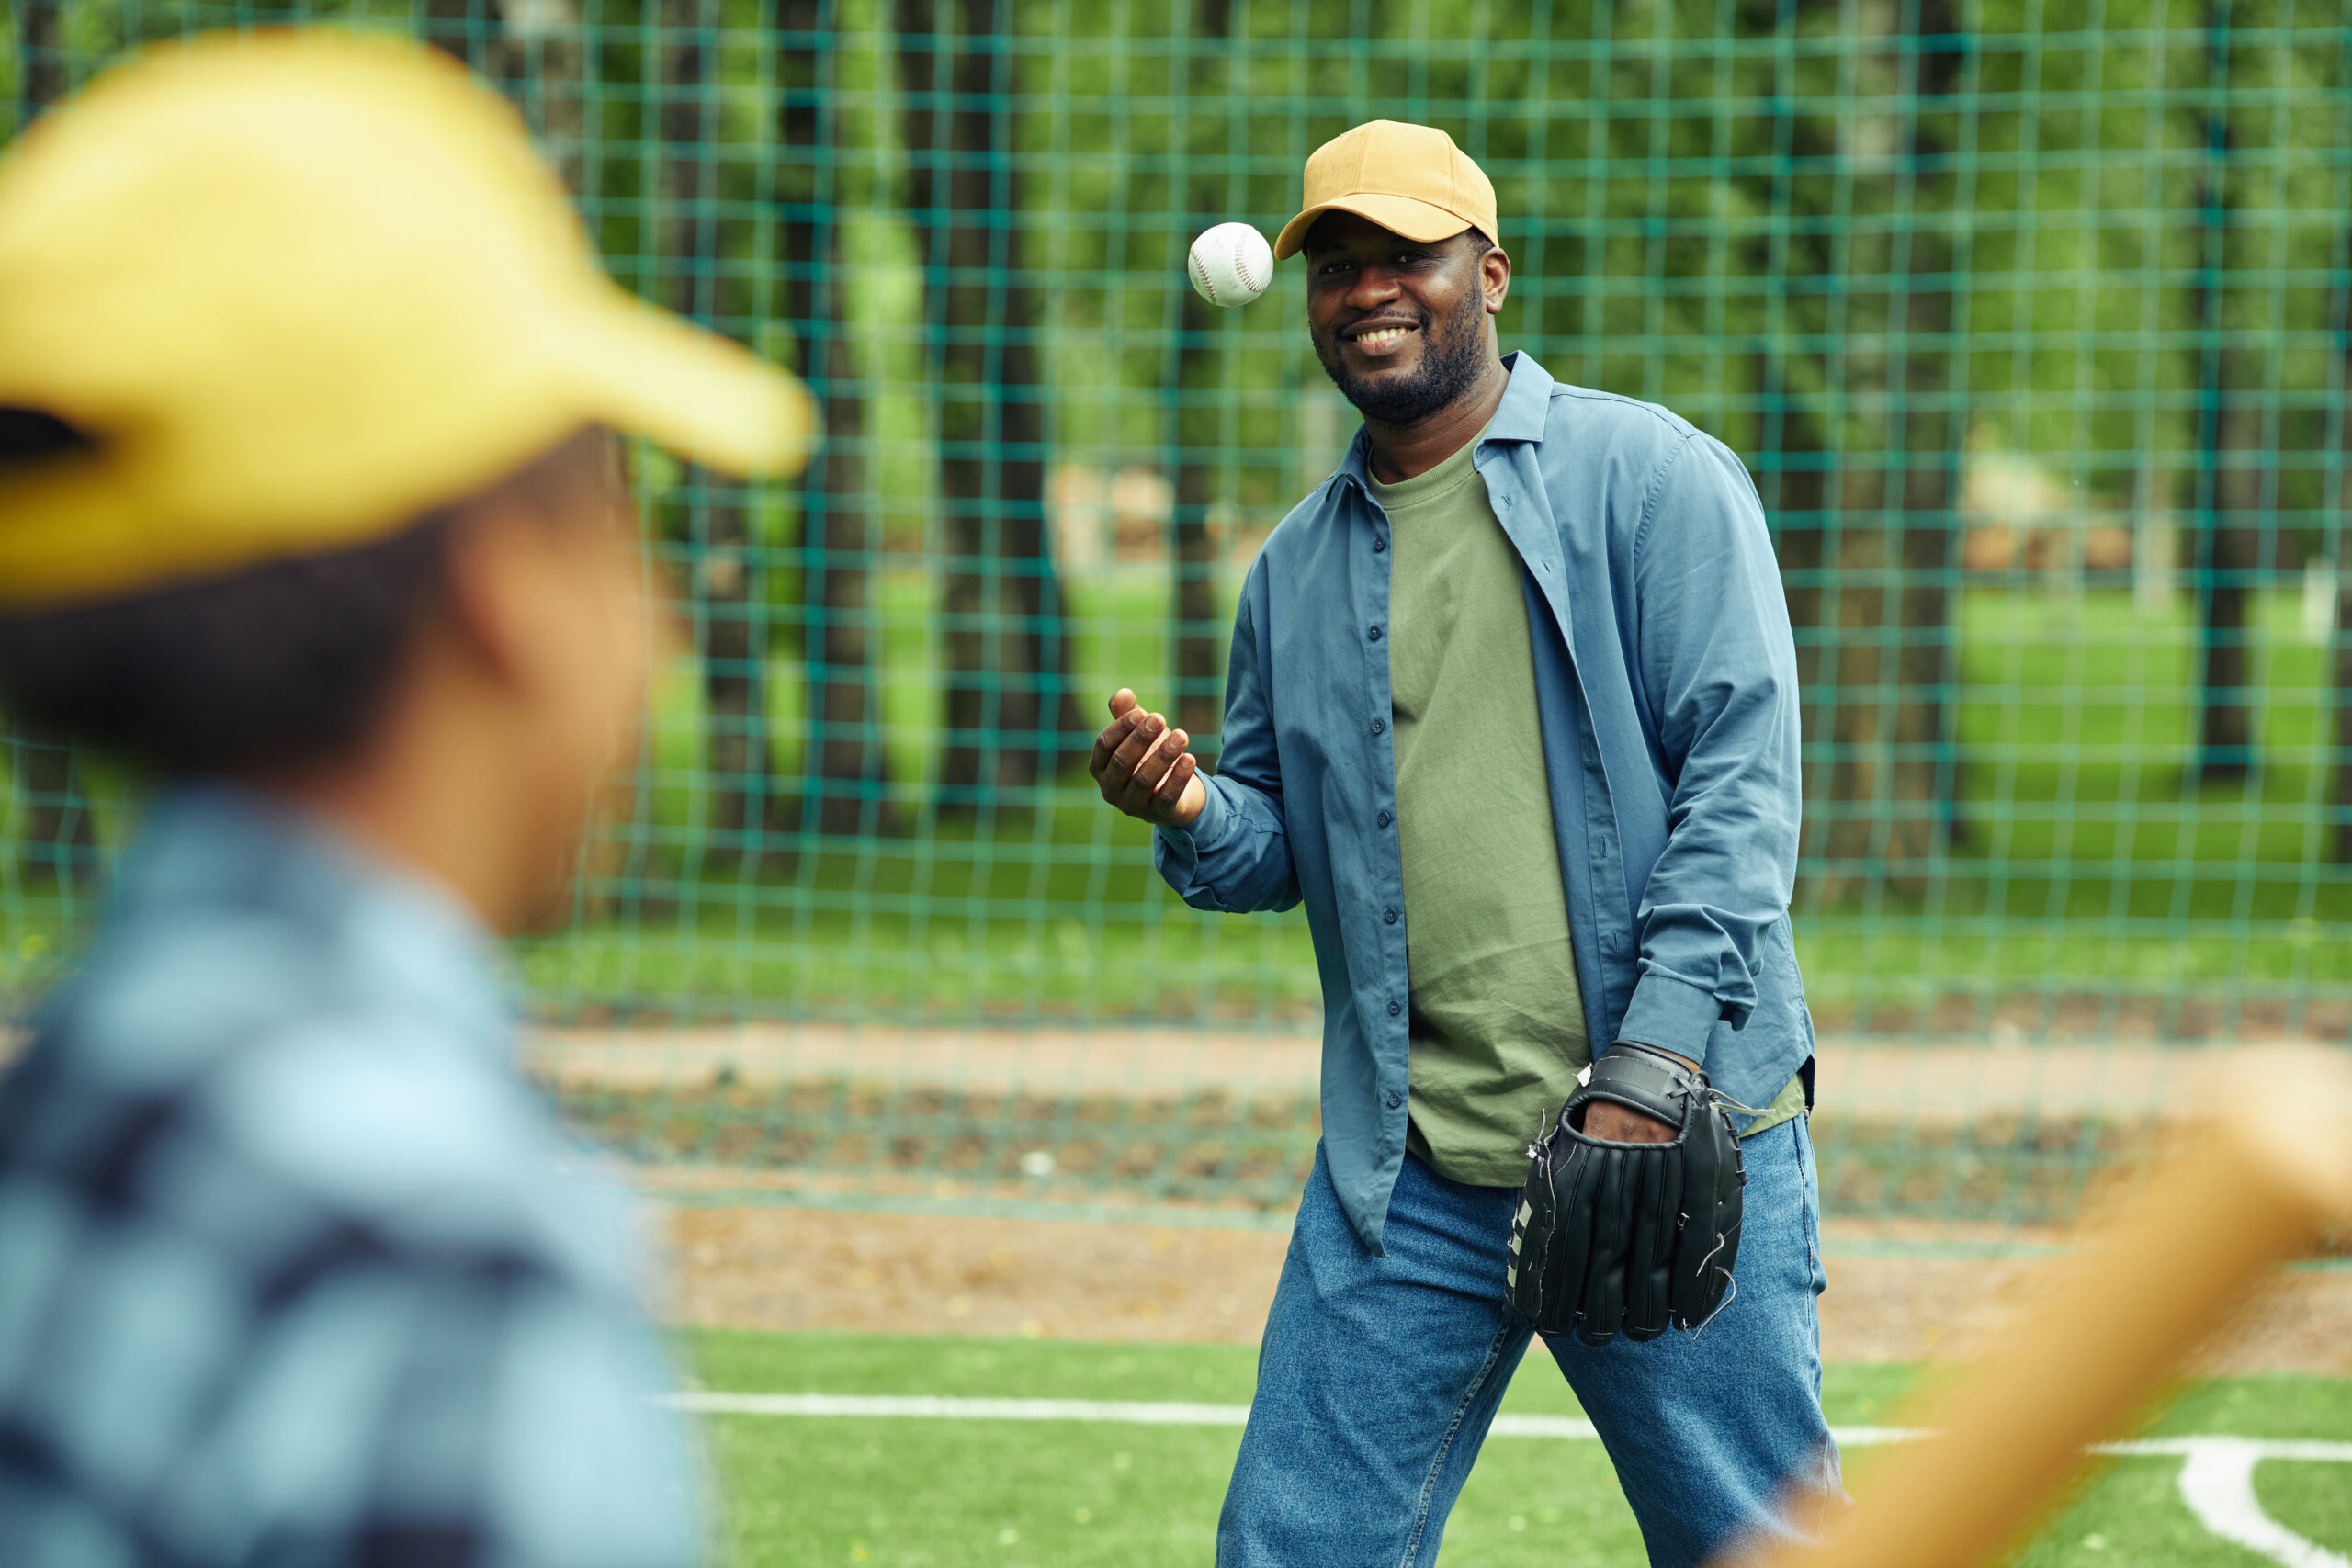 Enjoy a game of catch with Dad for Fathers Day